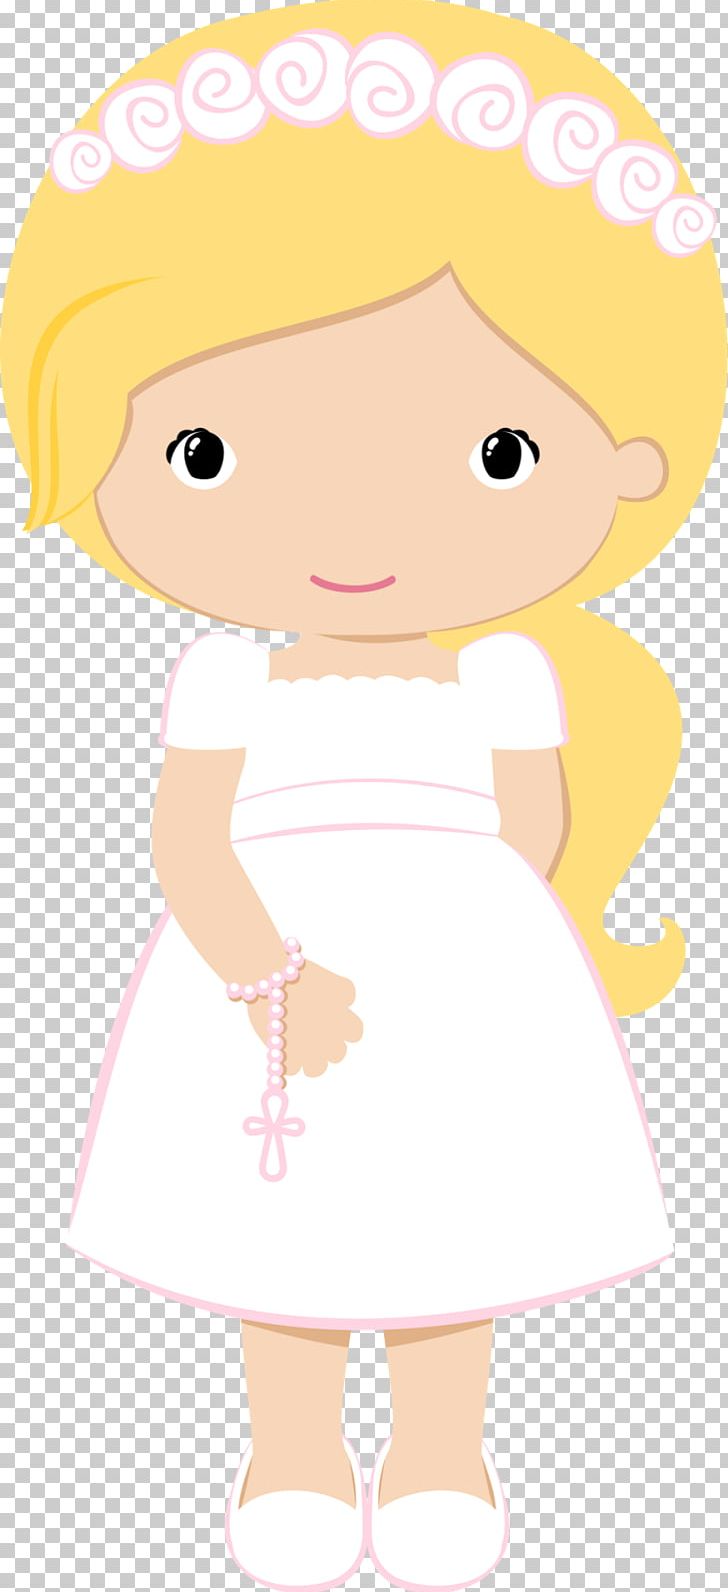 First Communion Eucharist Child PNG, Clipart, Art, Baptism, Boy, Cartoon, Chalice Free PNG Download